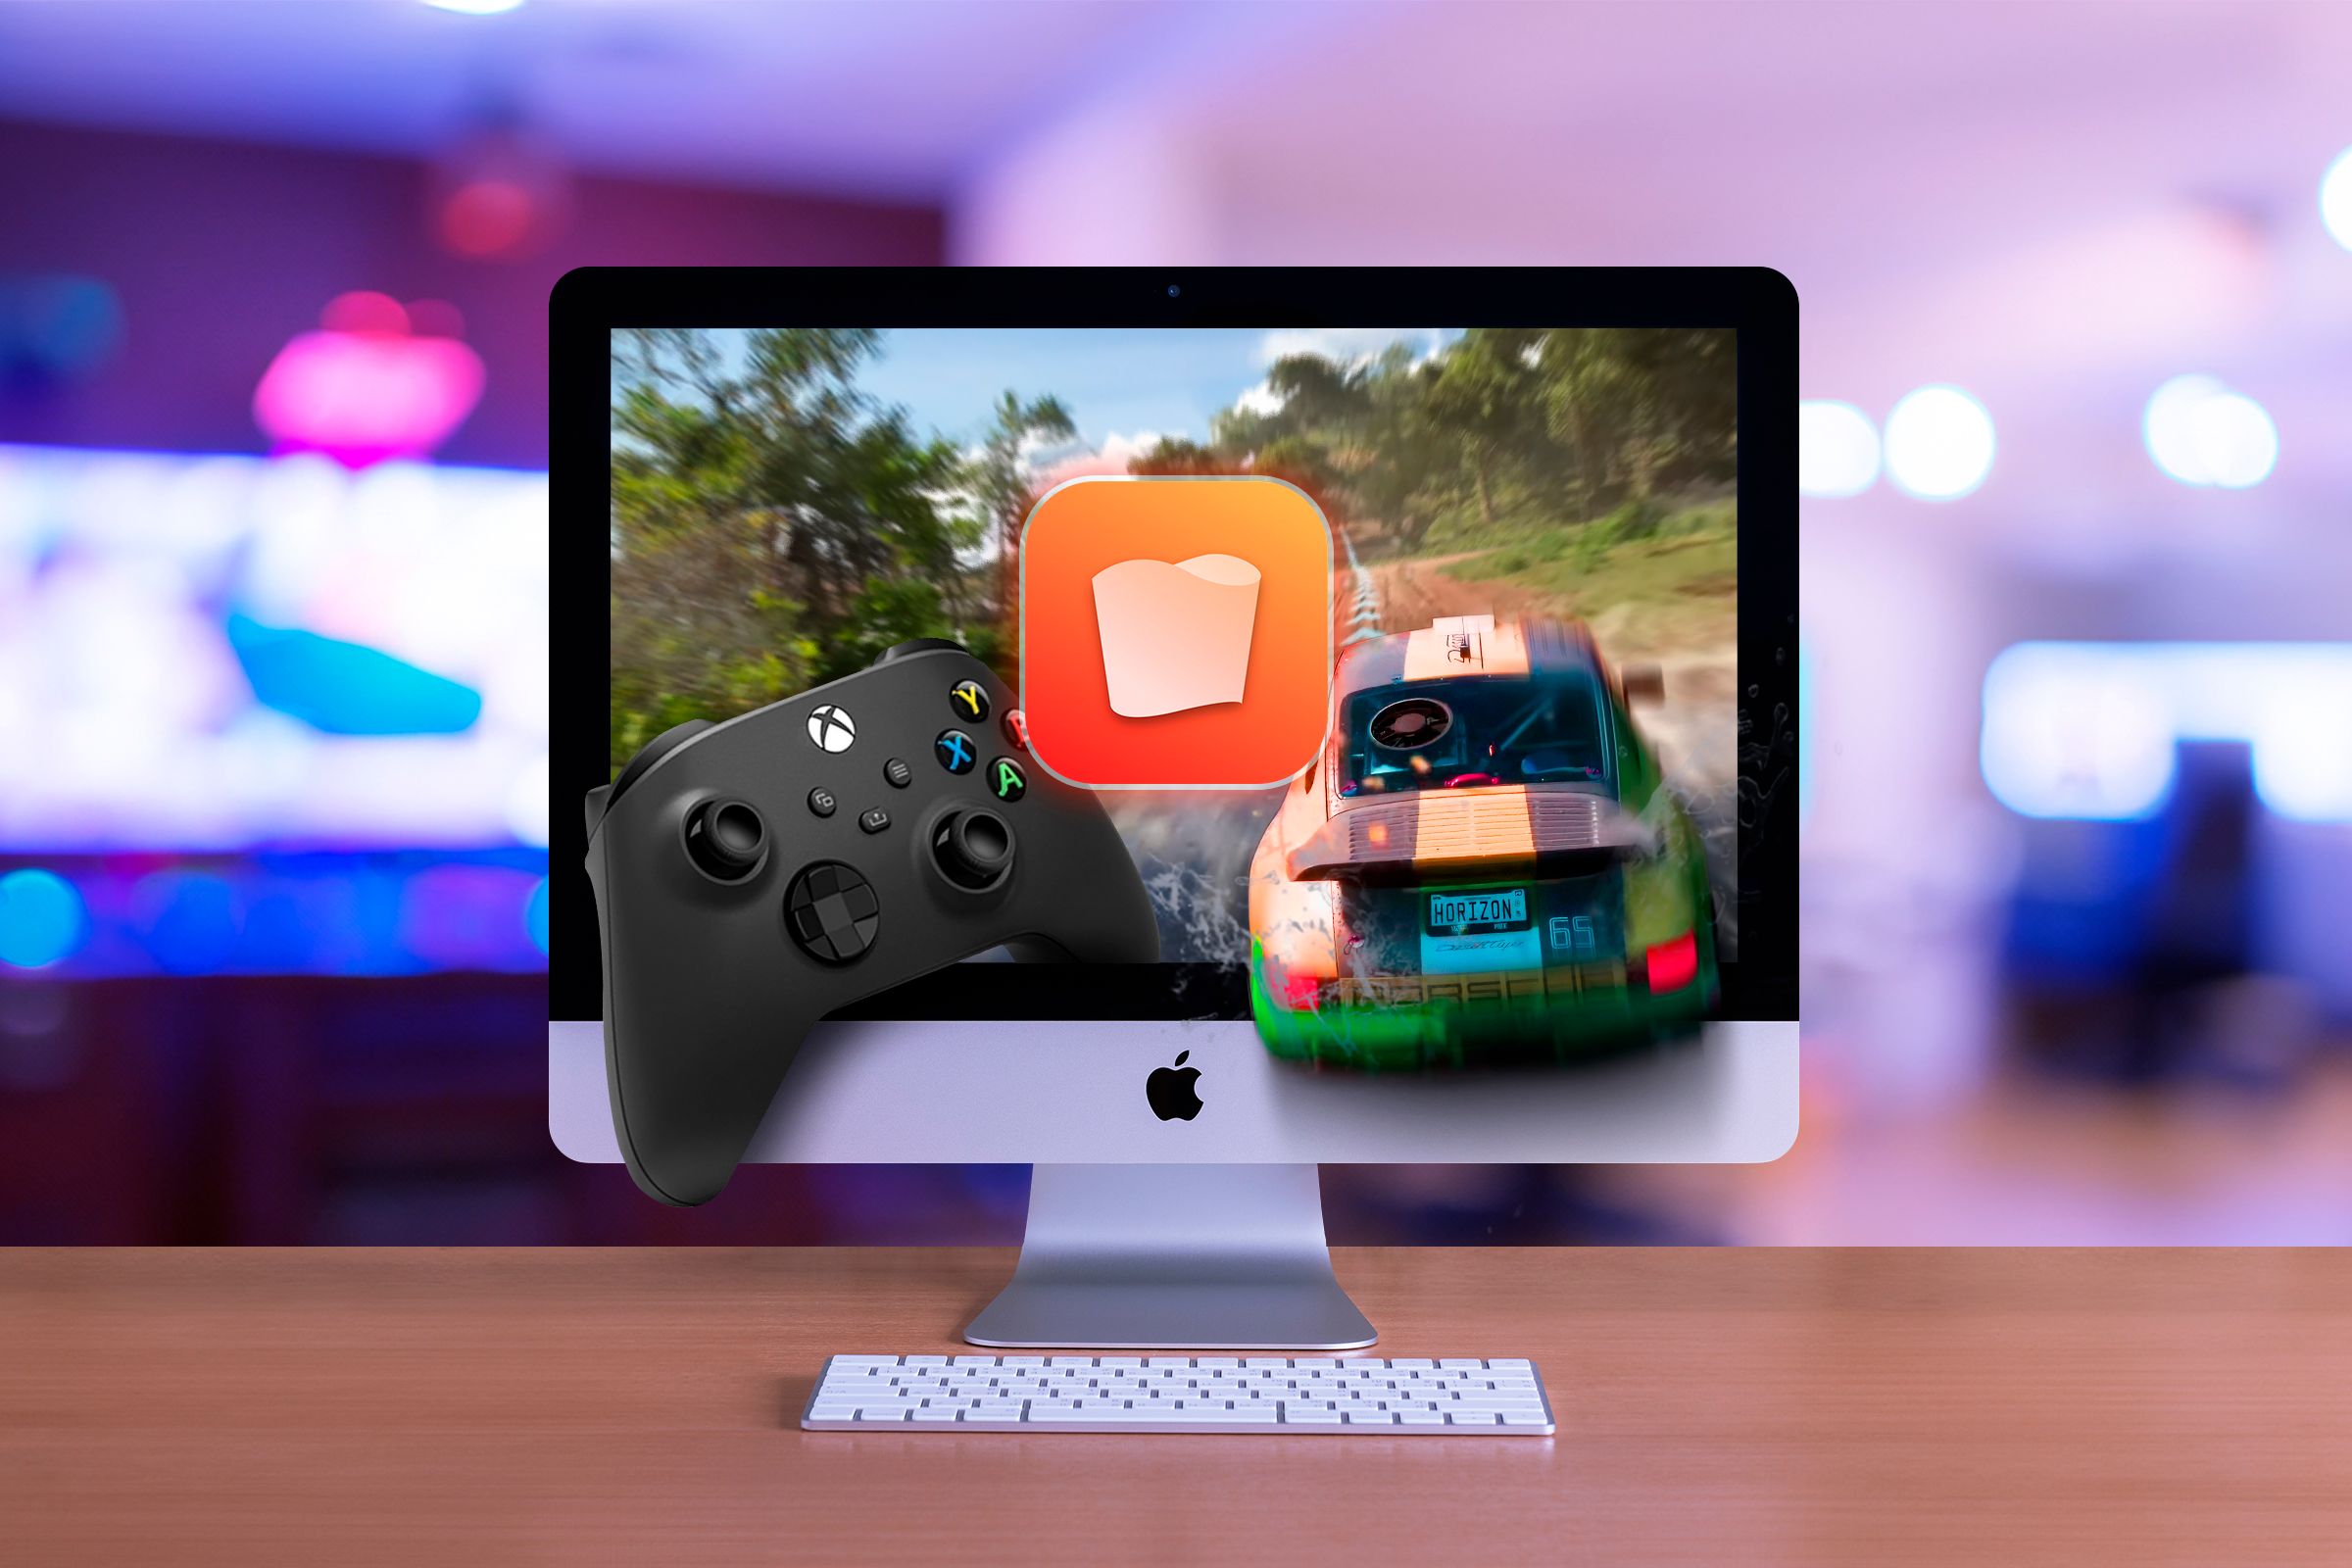 An iMac running a game with an Xbox controller on the left and the Whisky app logo in the center of the screen.